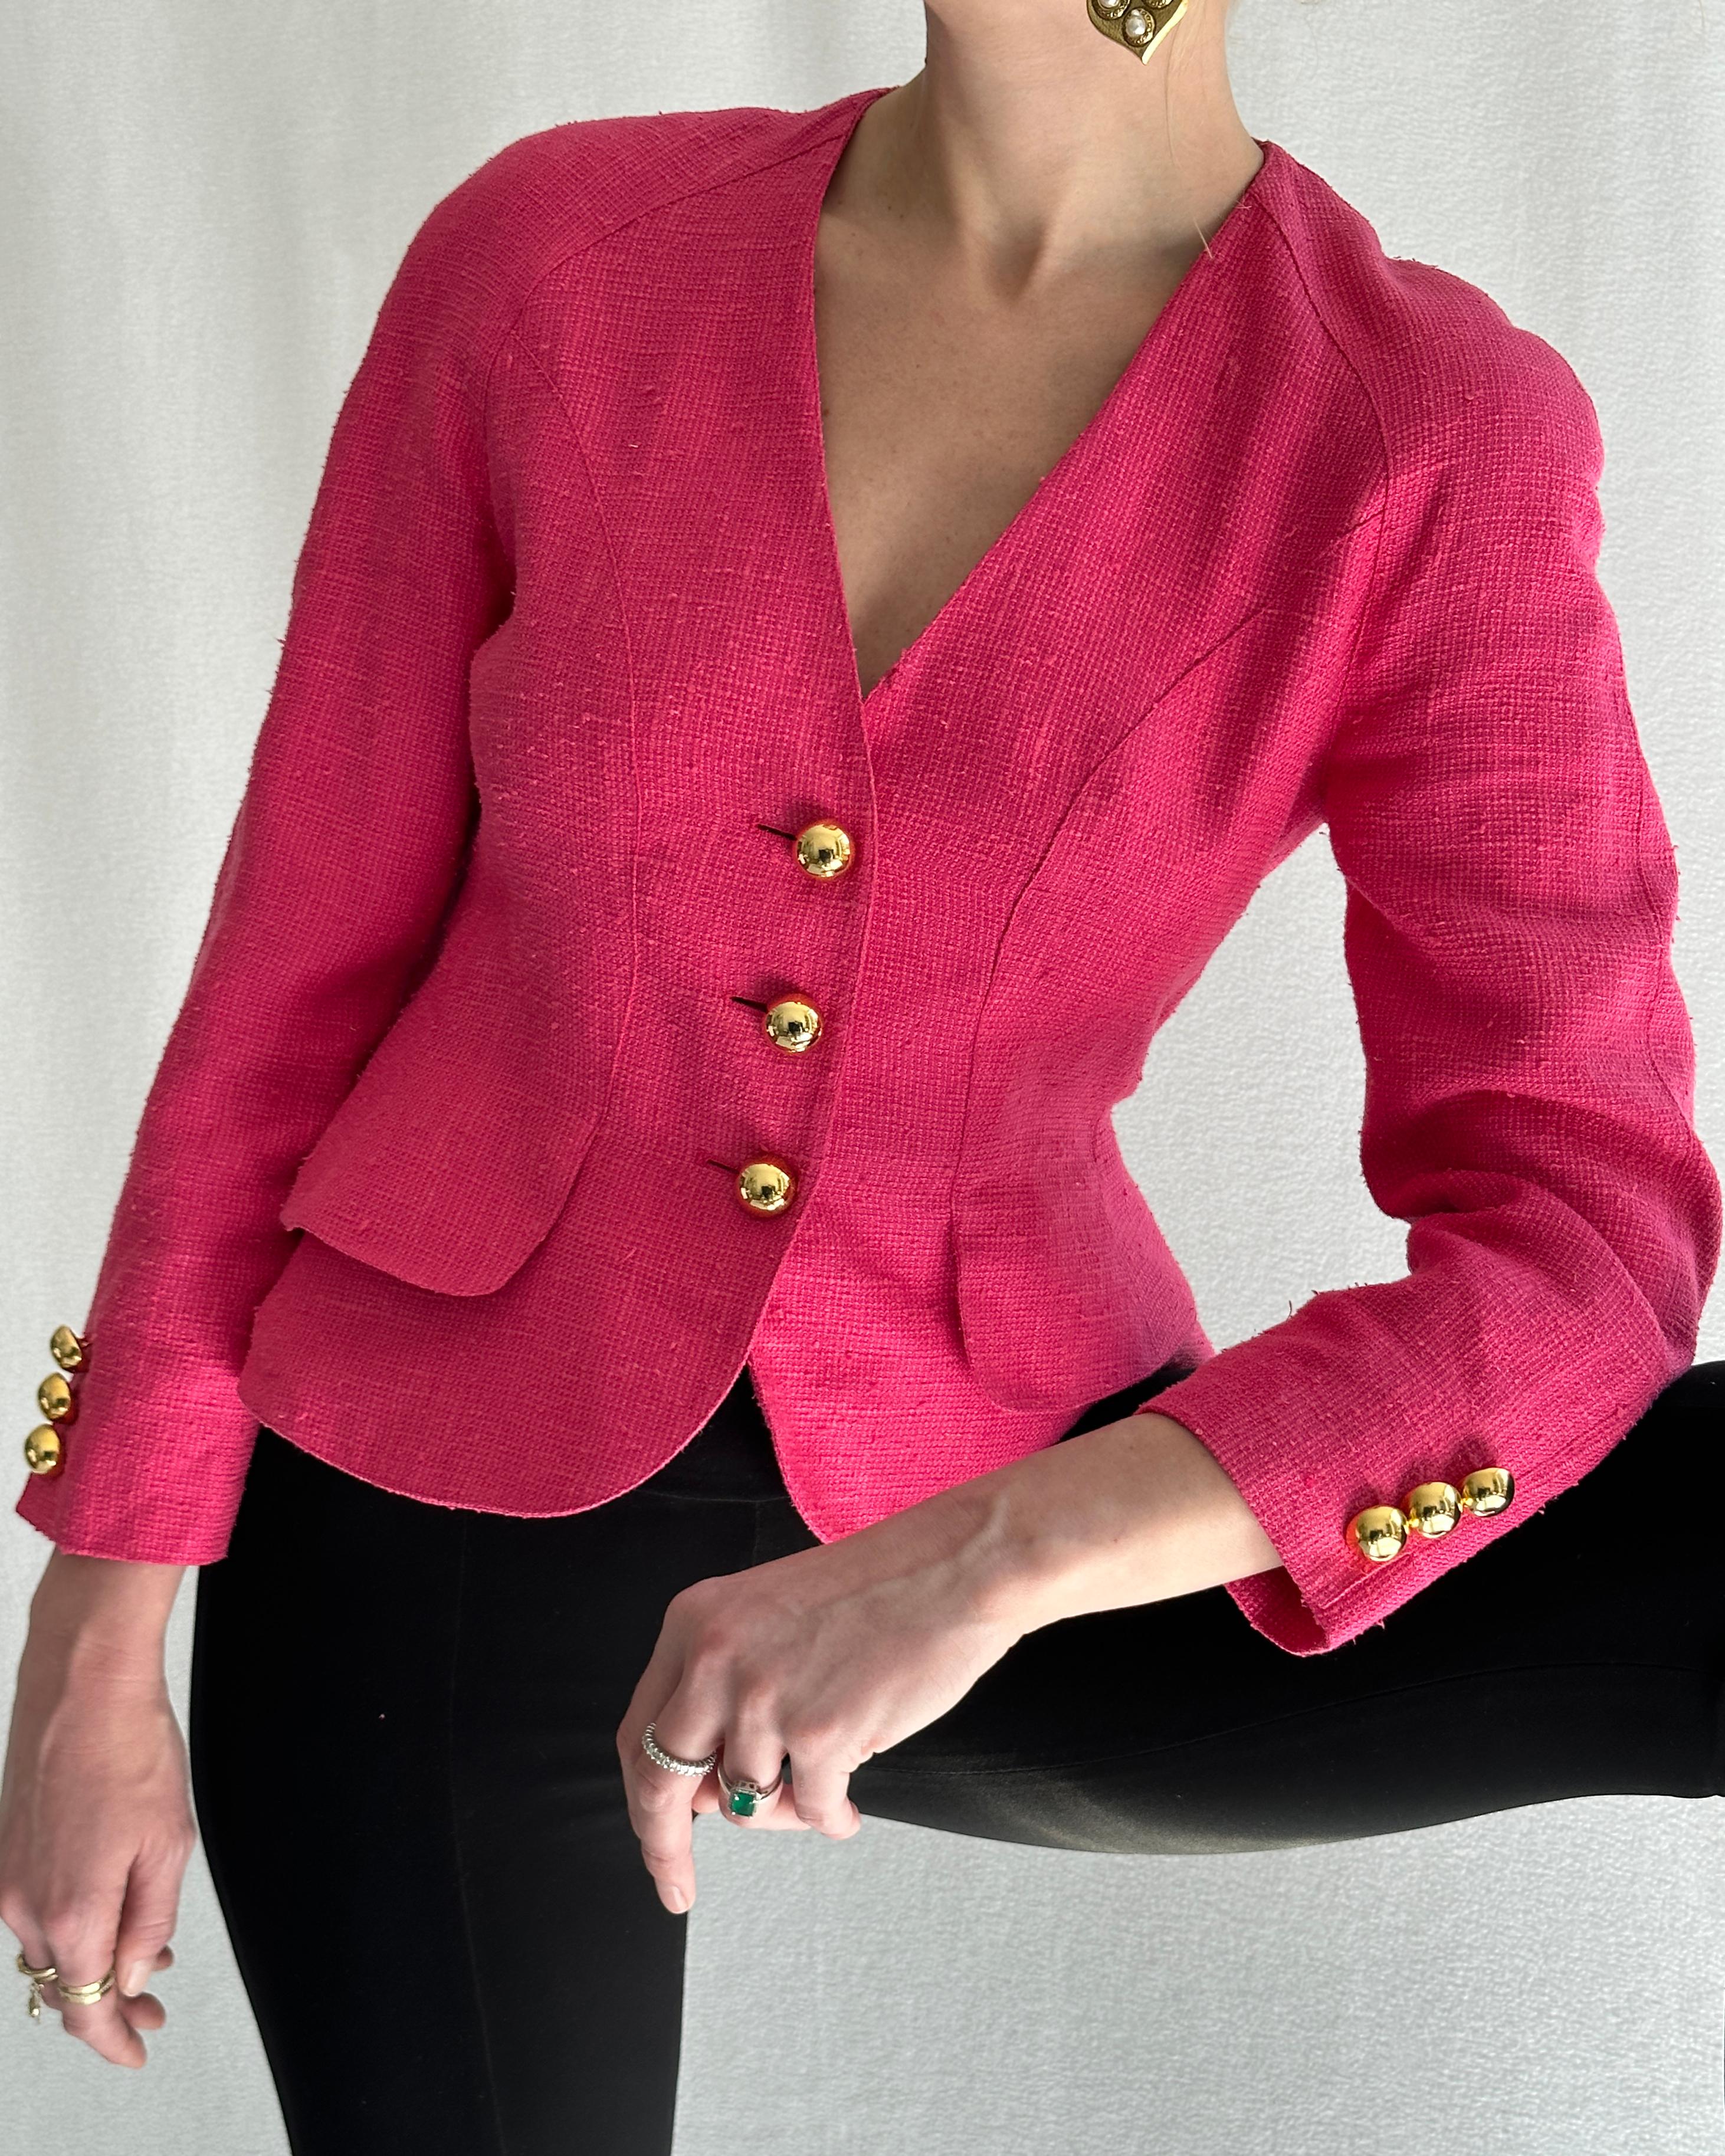 VERY BREEZY presents: Circa early 1990s, this Christian Lacroix Pret-a-Porter blazer is perfection, with masterful construction creating an hourglass shape. The gorgeous slub of the silk/linen fabric is further emphasized by the gorgeous hot pink—